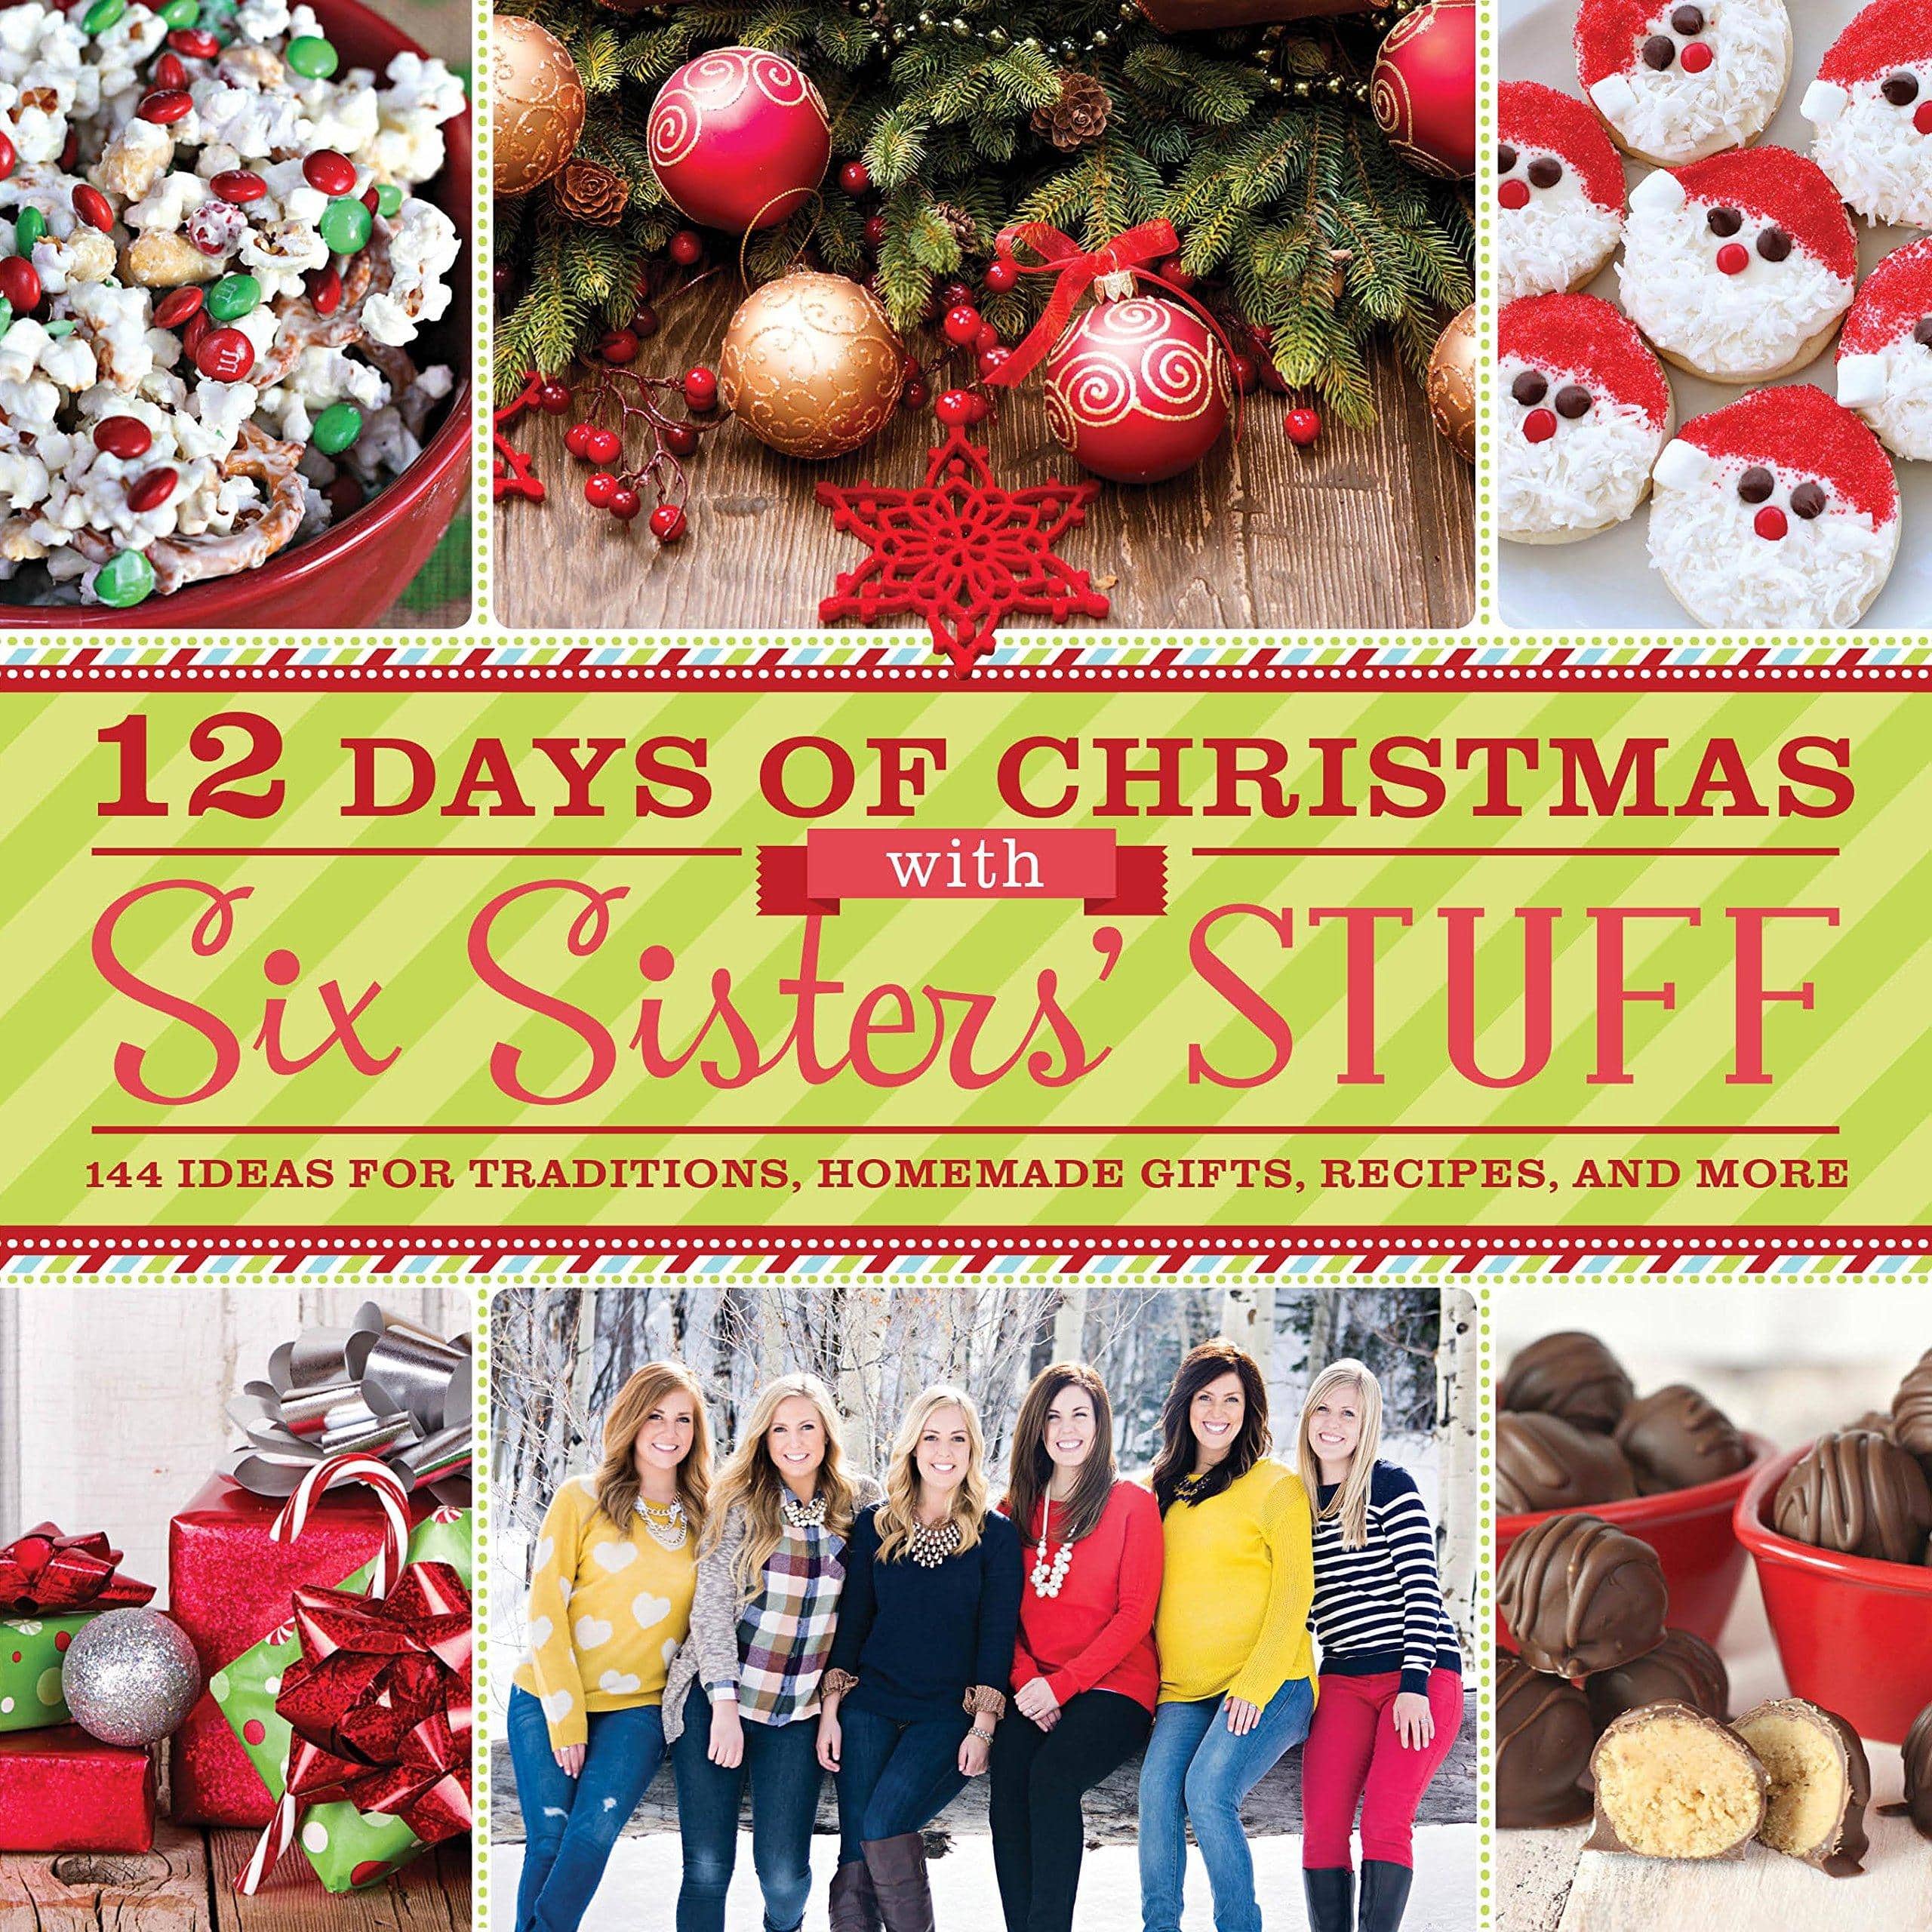 12 Days of Christmas with Six Sisters' Stuff: 144 Ideas for Trad - CA Corrections Bookstore